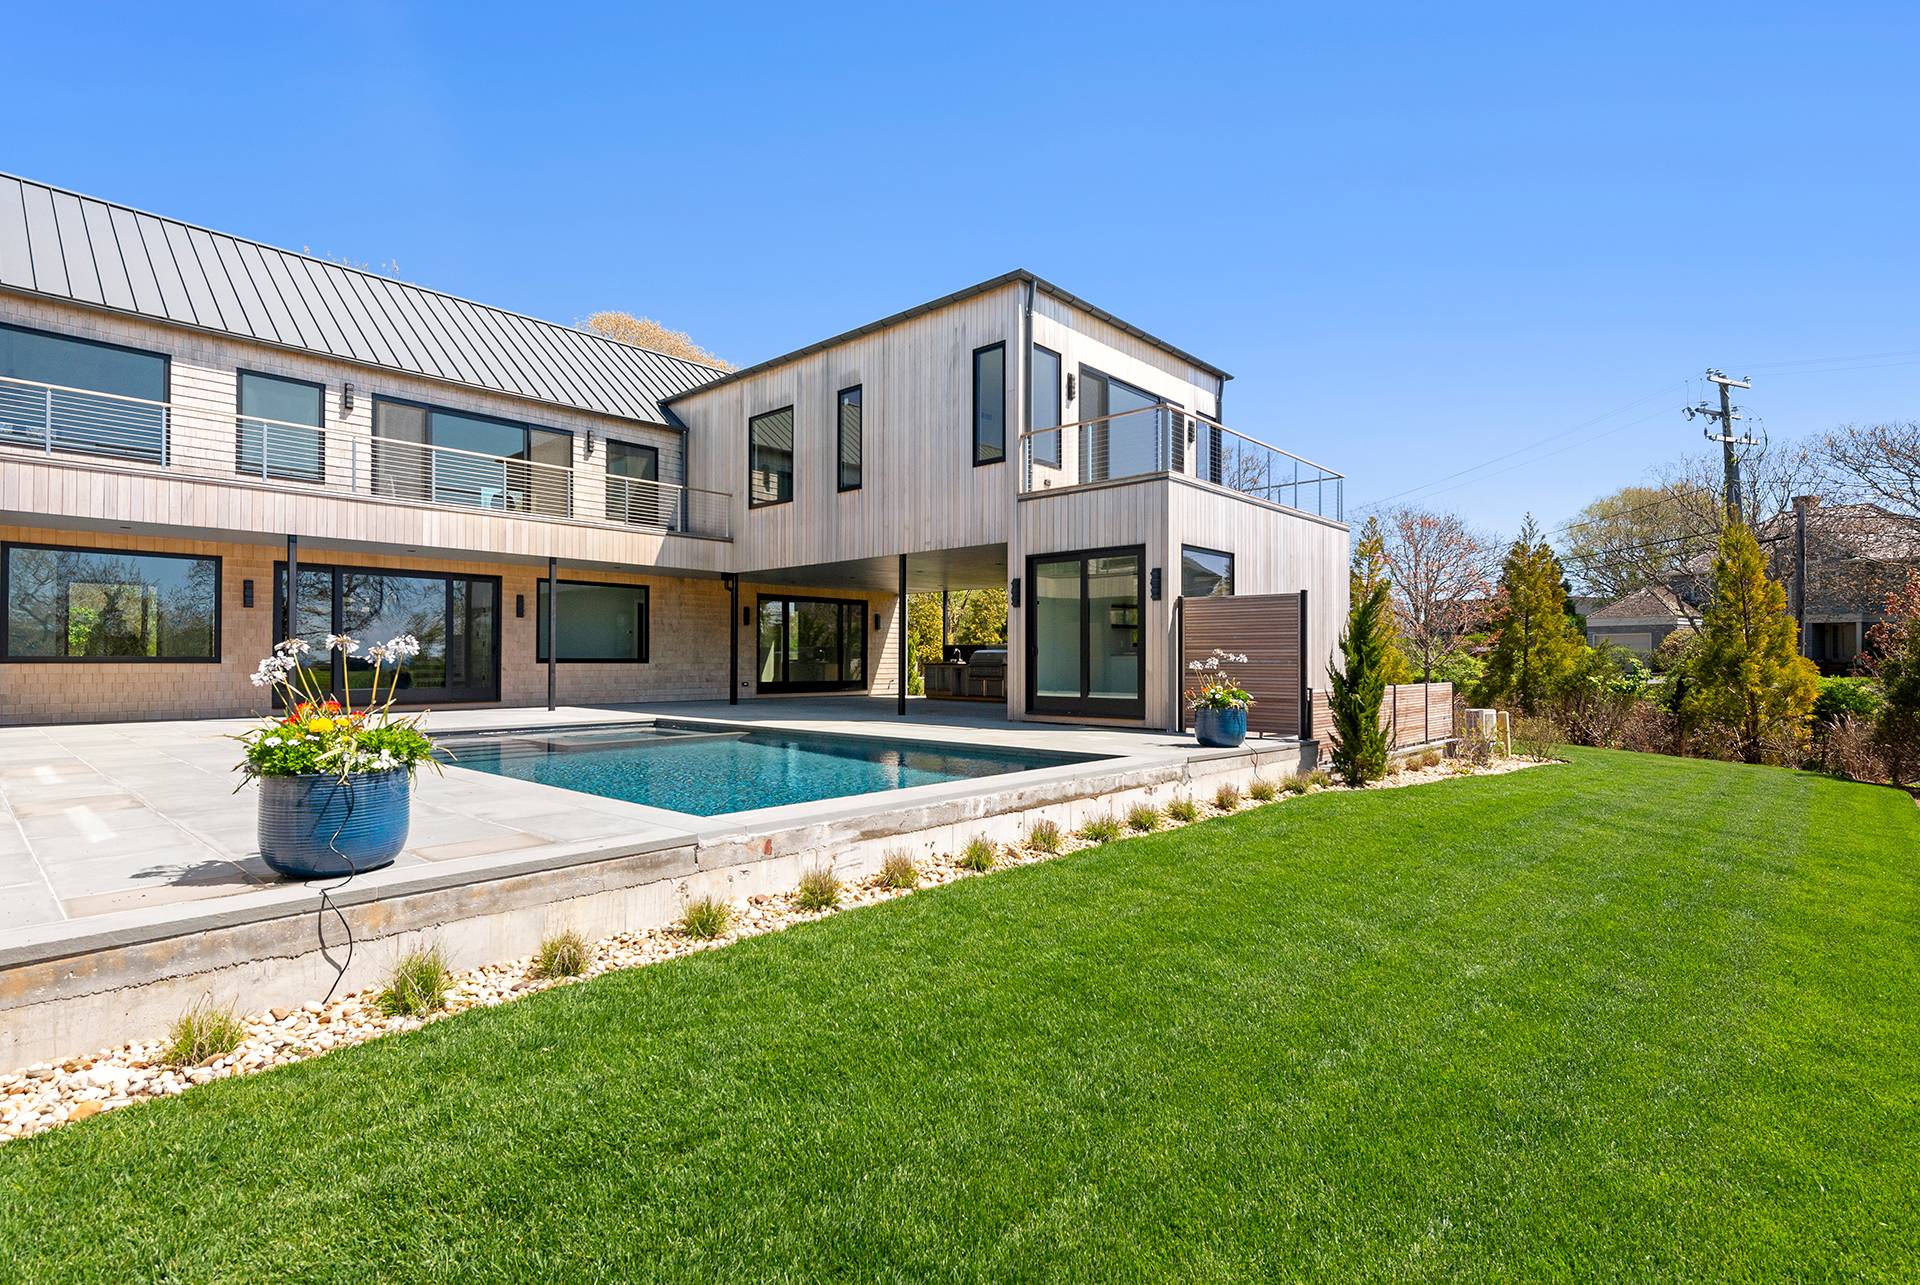 Property for Sale at Montauk, Montauk, Hamptons, NY - Bedrooms: 4 
Bathrooms: 4.5  - $8,995,000